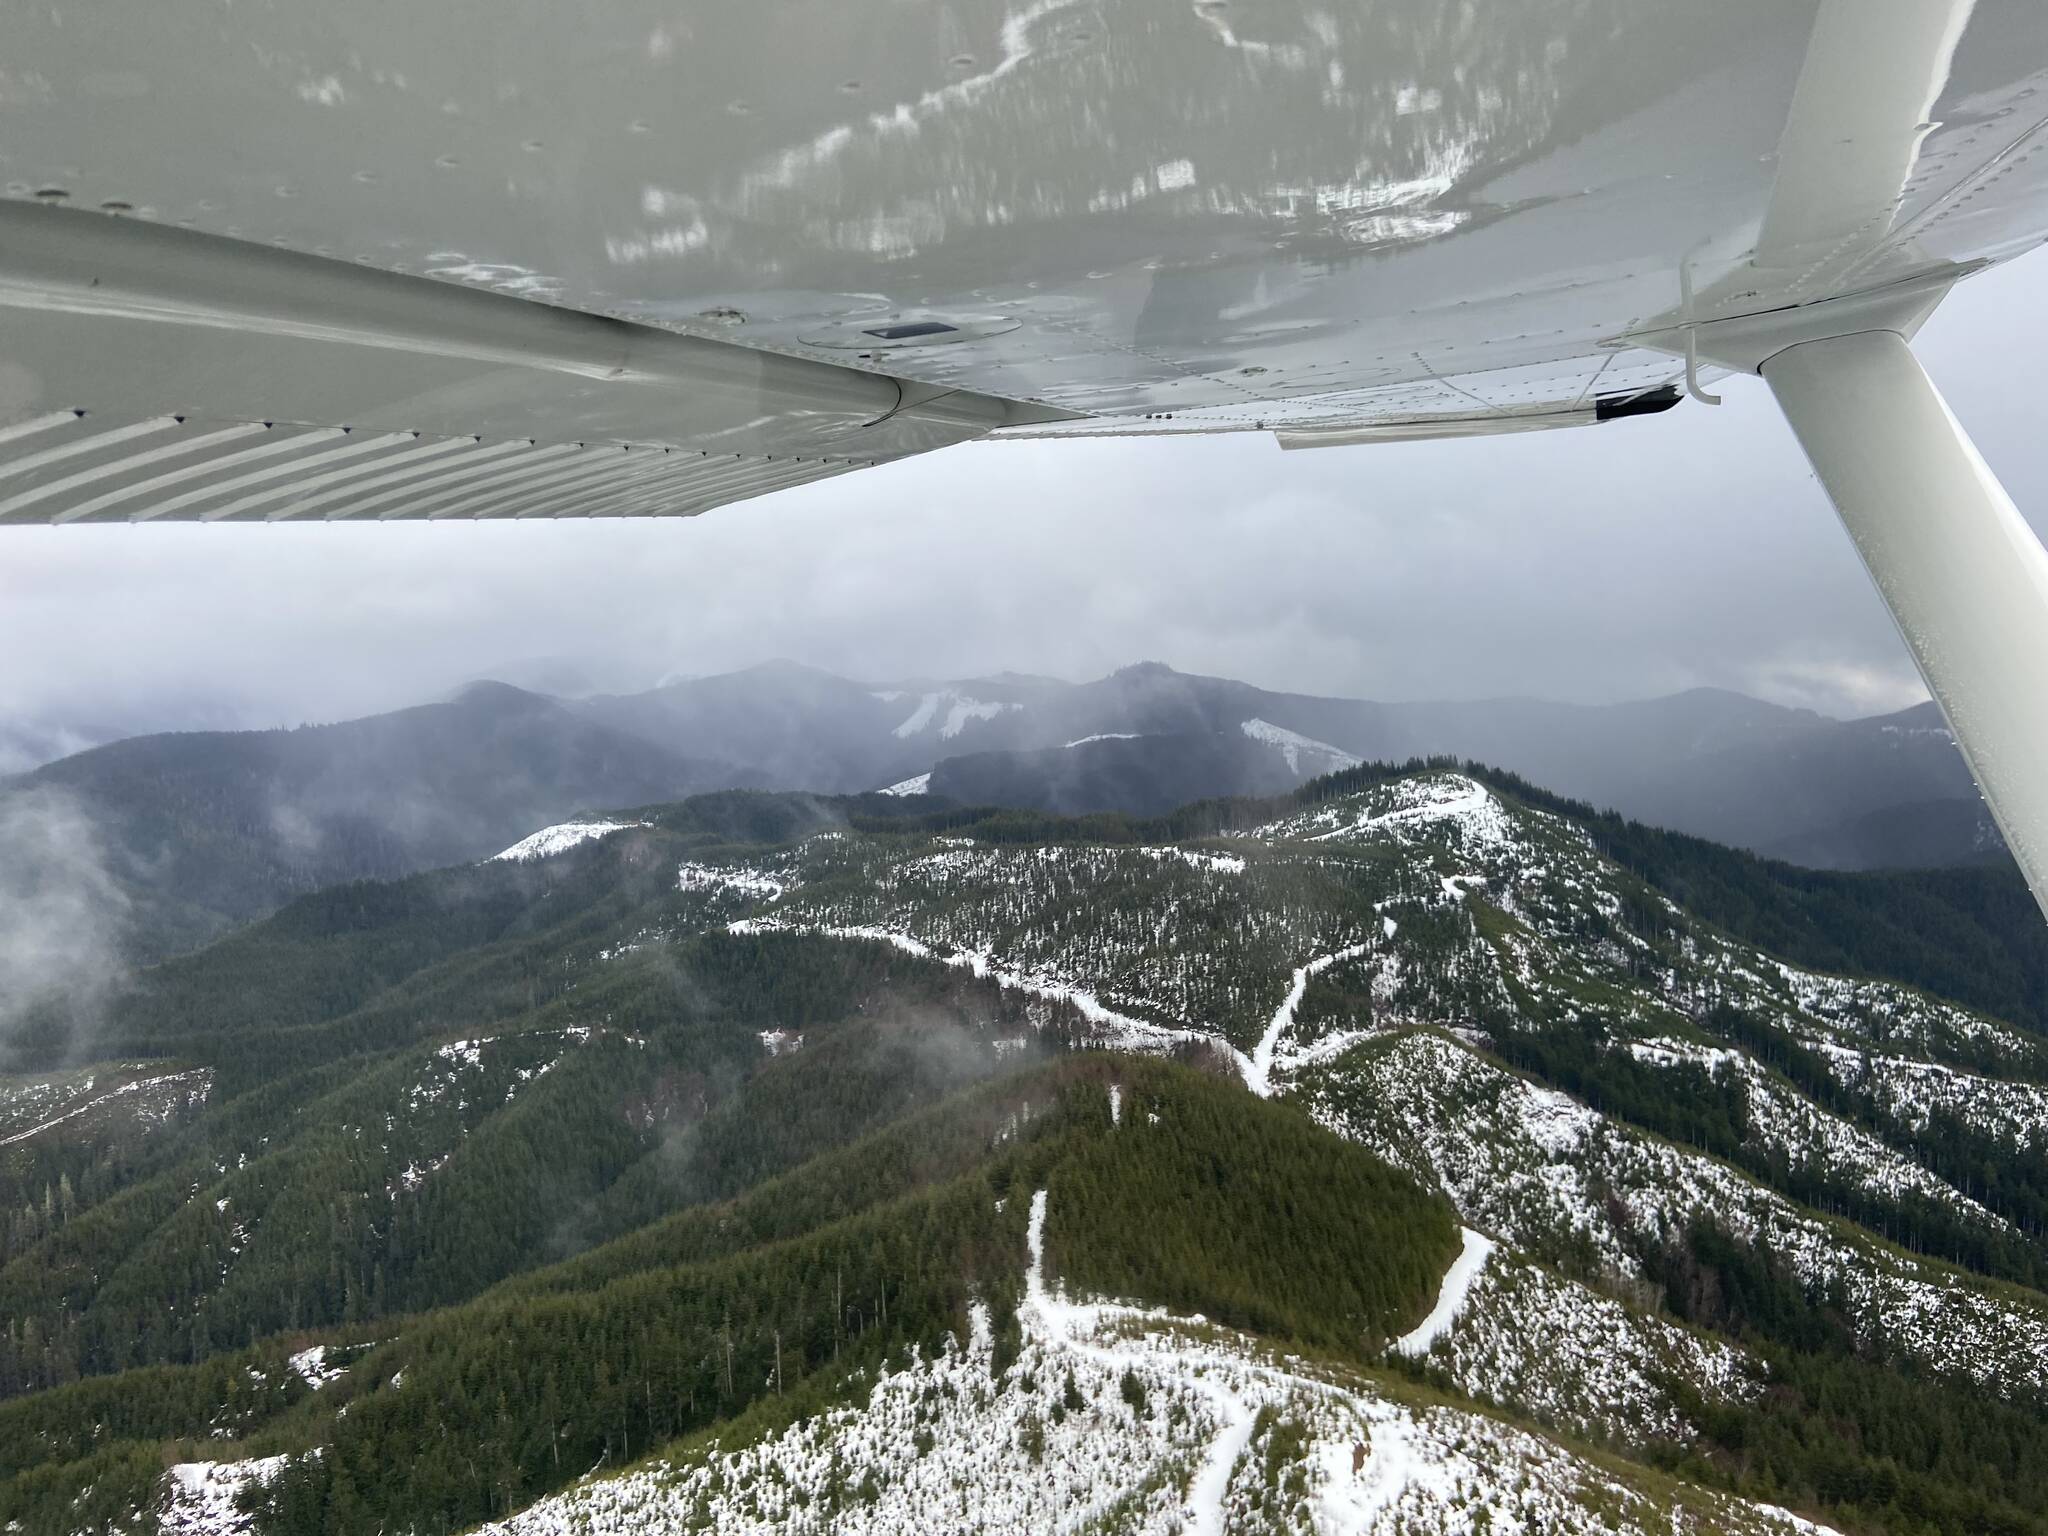 The Washington Department of Transportation is coordinating the search for a missing aircraft and pilot in the rugged wilderness near Queets, seen here, though weather is complicating search efforts for the plane, missing since March 6. (Courtesy photo / WSDOT)